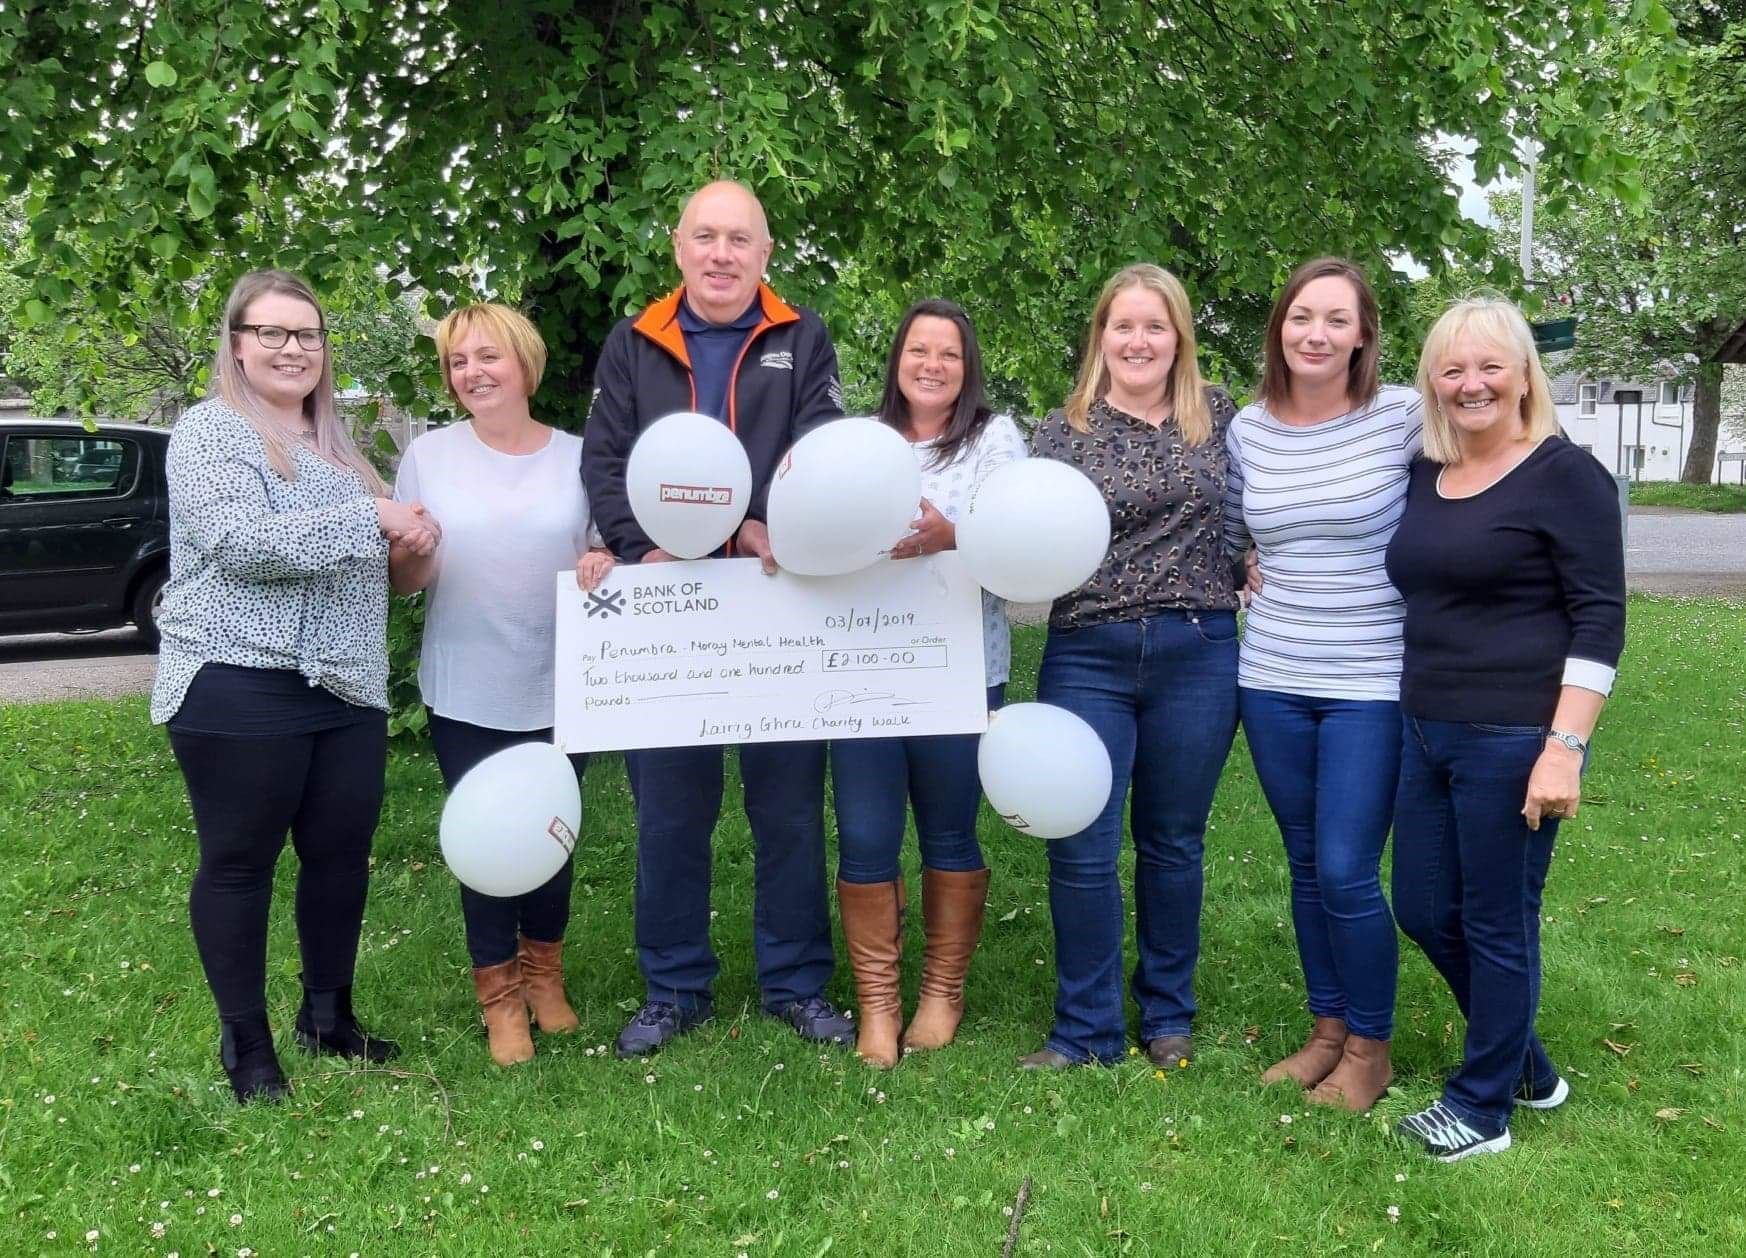 From left, Tomintoul walkers Dionne Sim, Andrew Sim, Janice Levack, Louise Stuart, Zoe Hamilton and Anne Phillips presenting the cheque to Sarah Mcgregor, from Moray Mental Health.